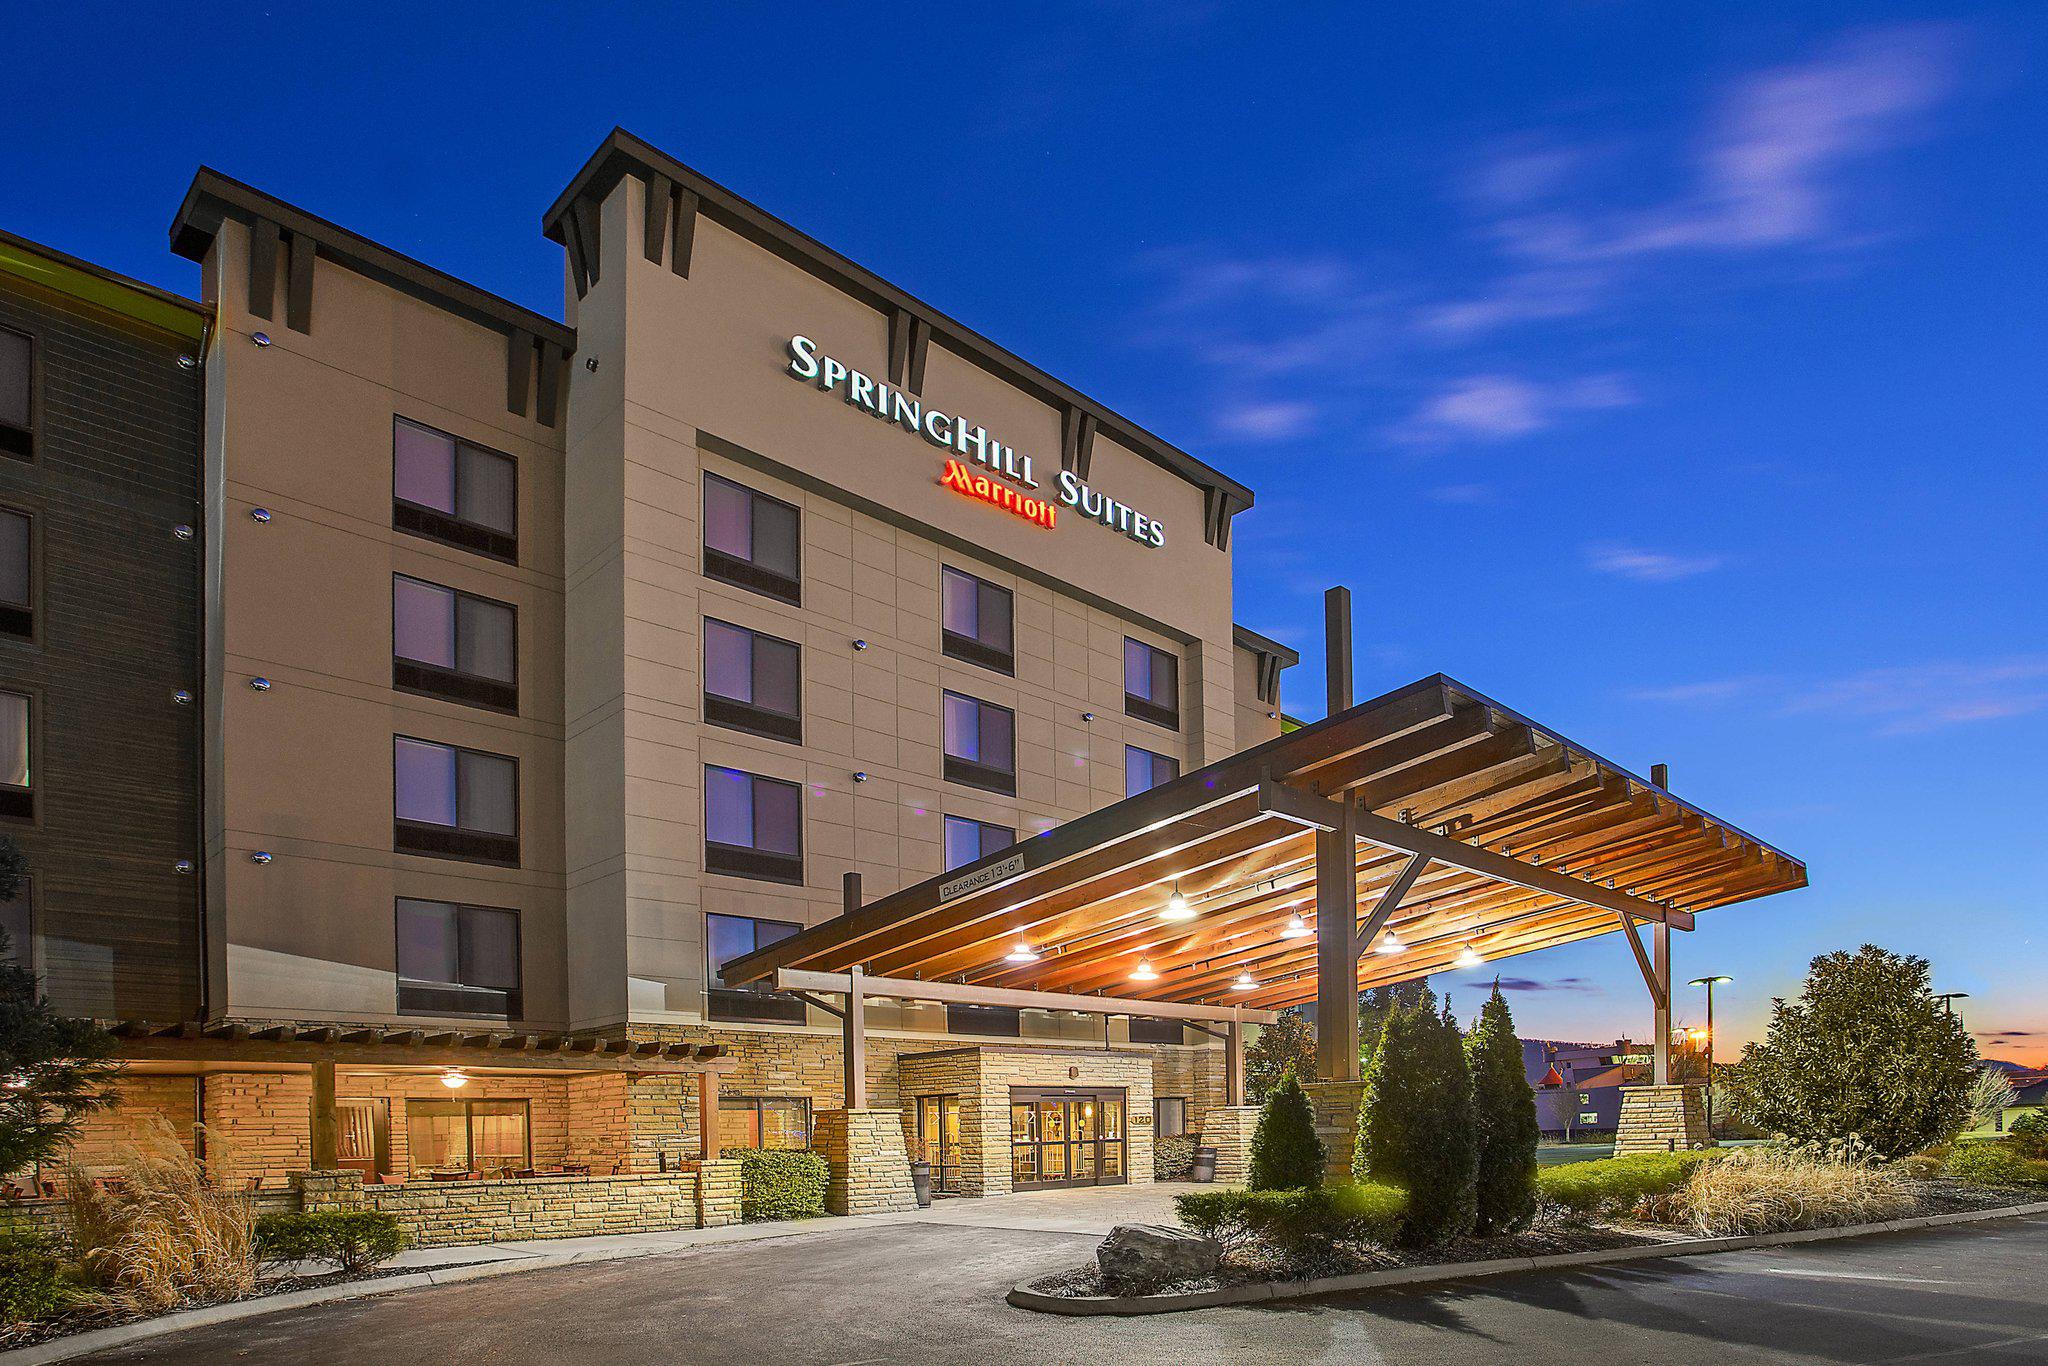 SpringHill Suites by Marriott Pigeon Forge Photo